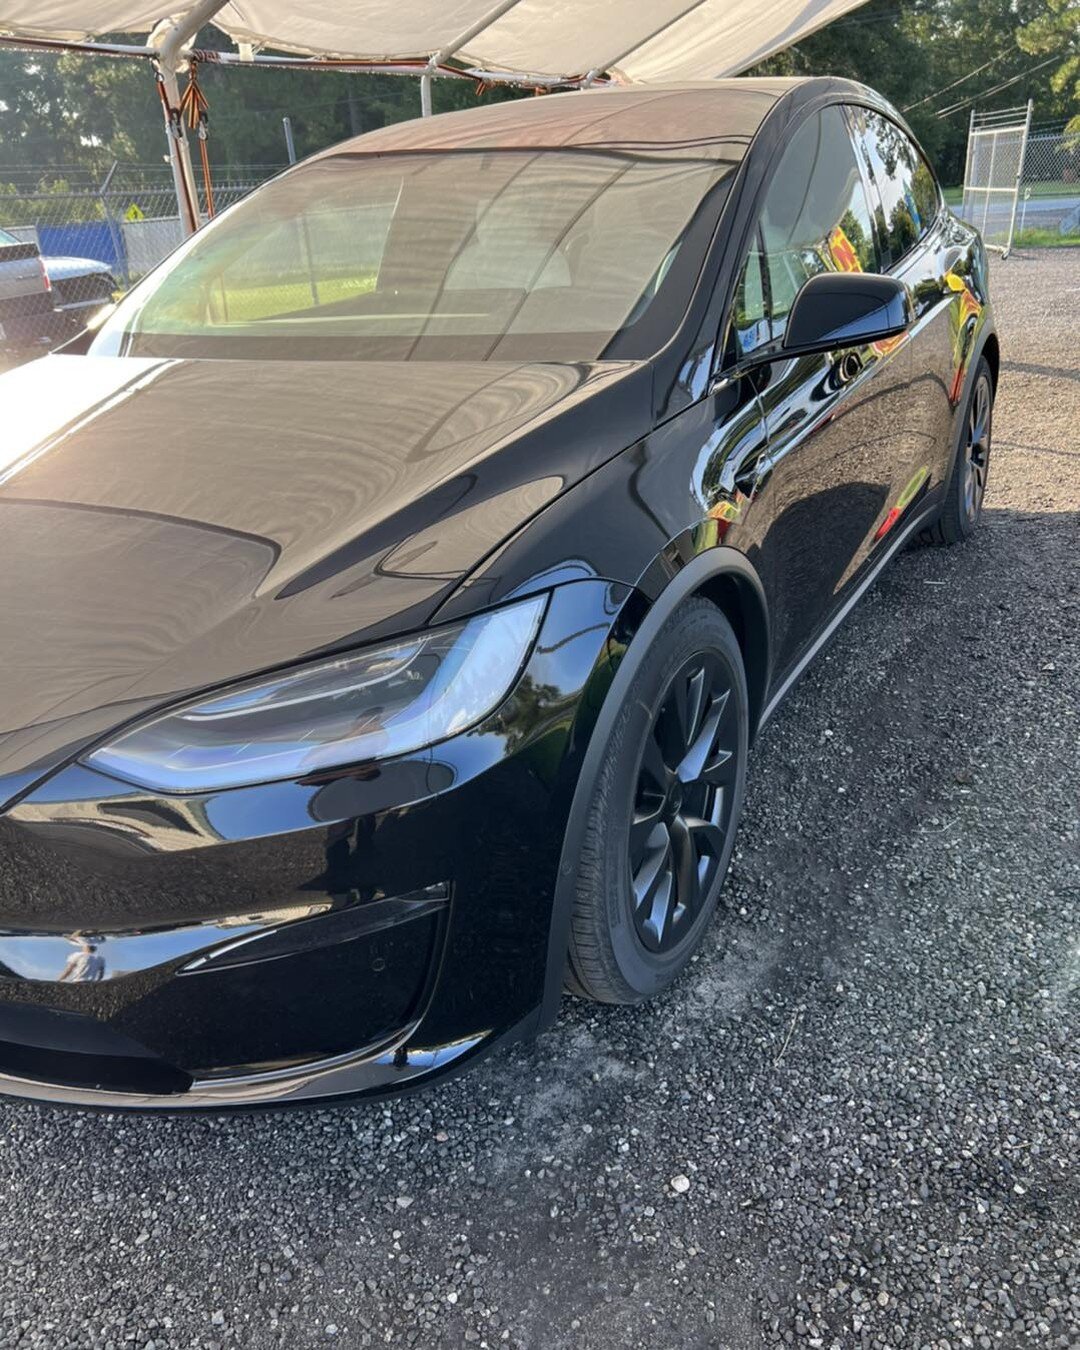 Happy Friday Gratus family! Call today to set up an appointment. 912-268-0008 or book online at gratusdetail.com.

We are your one stop for all of your detailing needs. We do it all. 

Stay tuned for the finished results on this beautiful Model X Pla